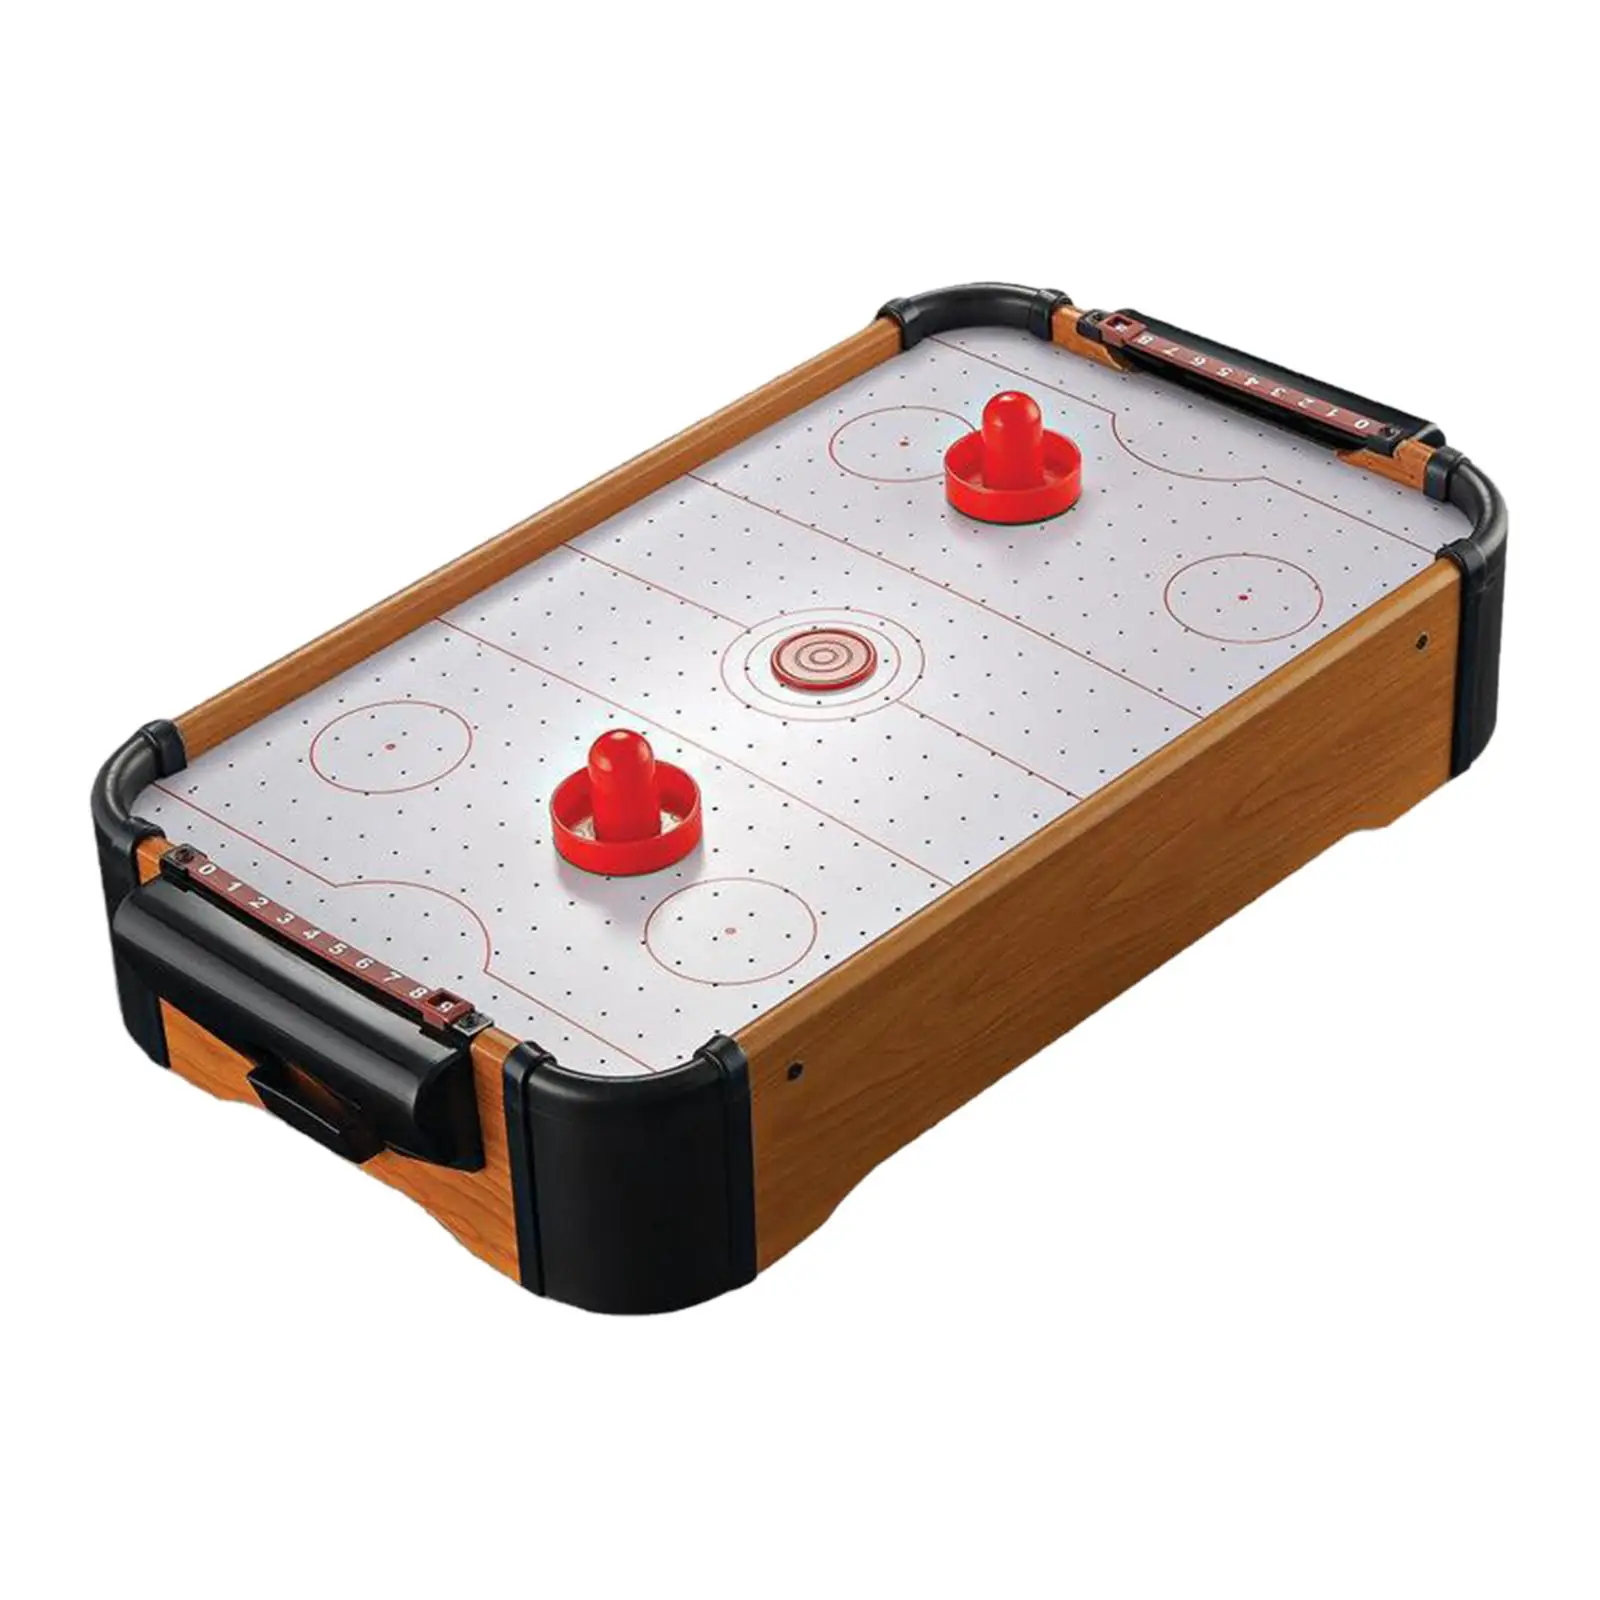 Cute Hockey Game Set Party Tabletop Interactive Family Game Two Players Play Football Board Table top Hockey for Adults Kids